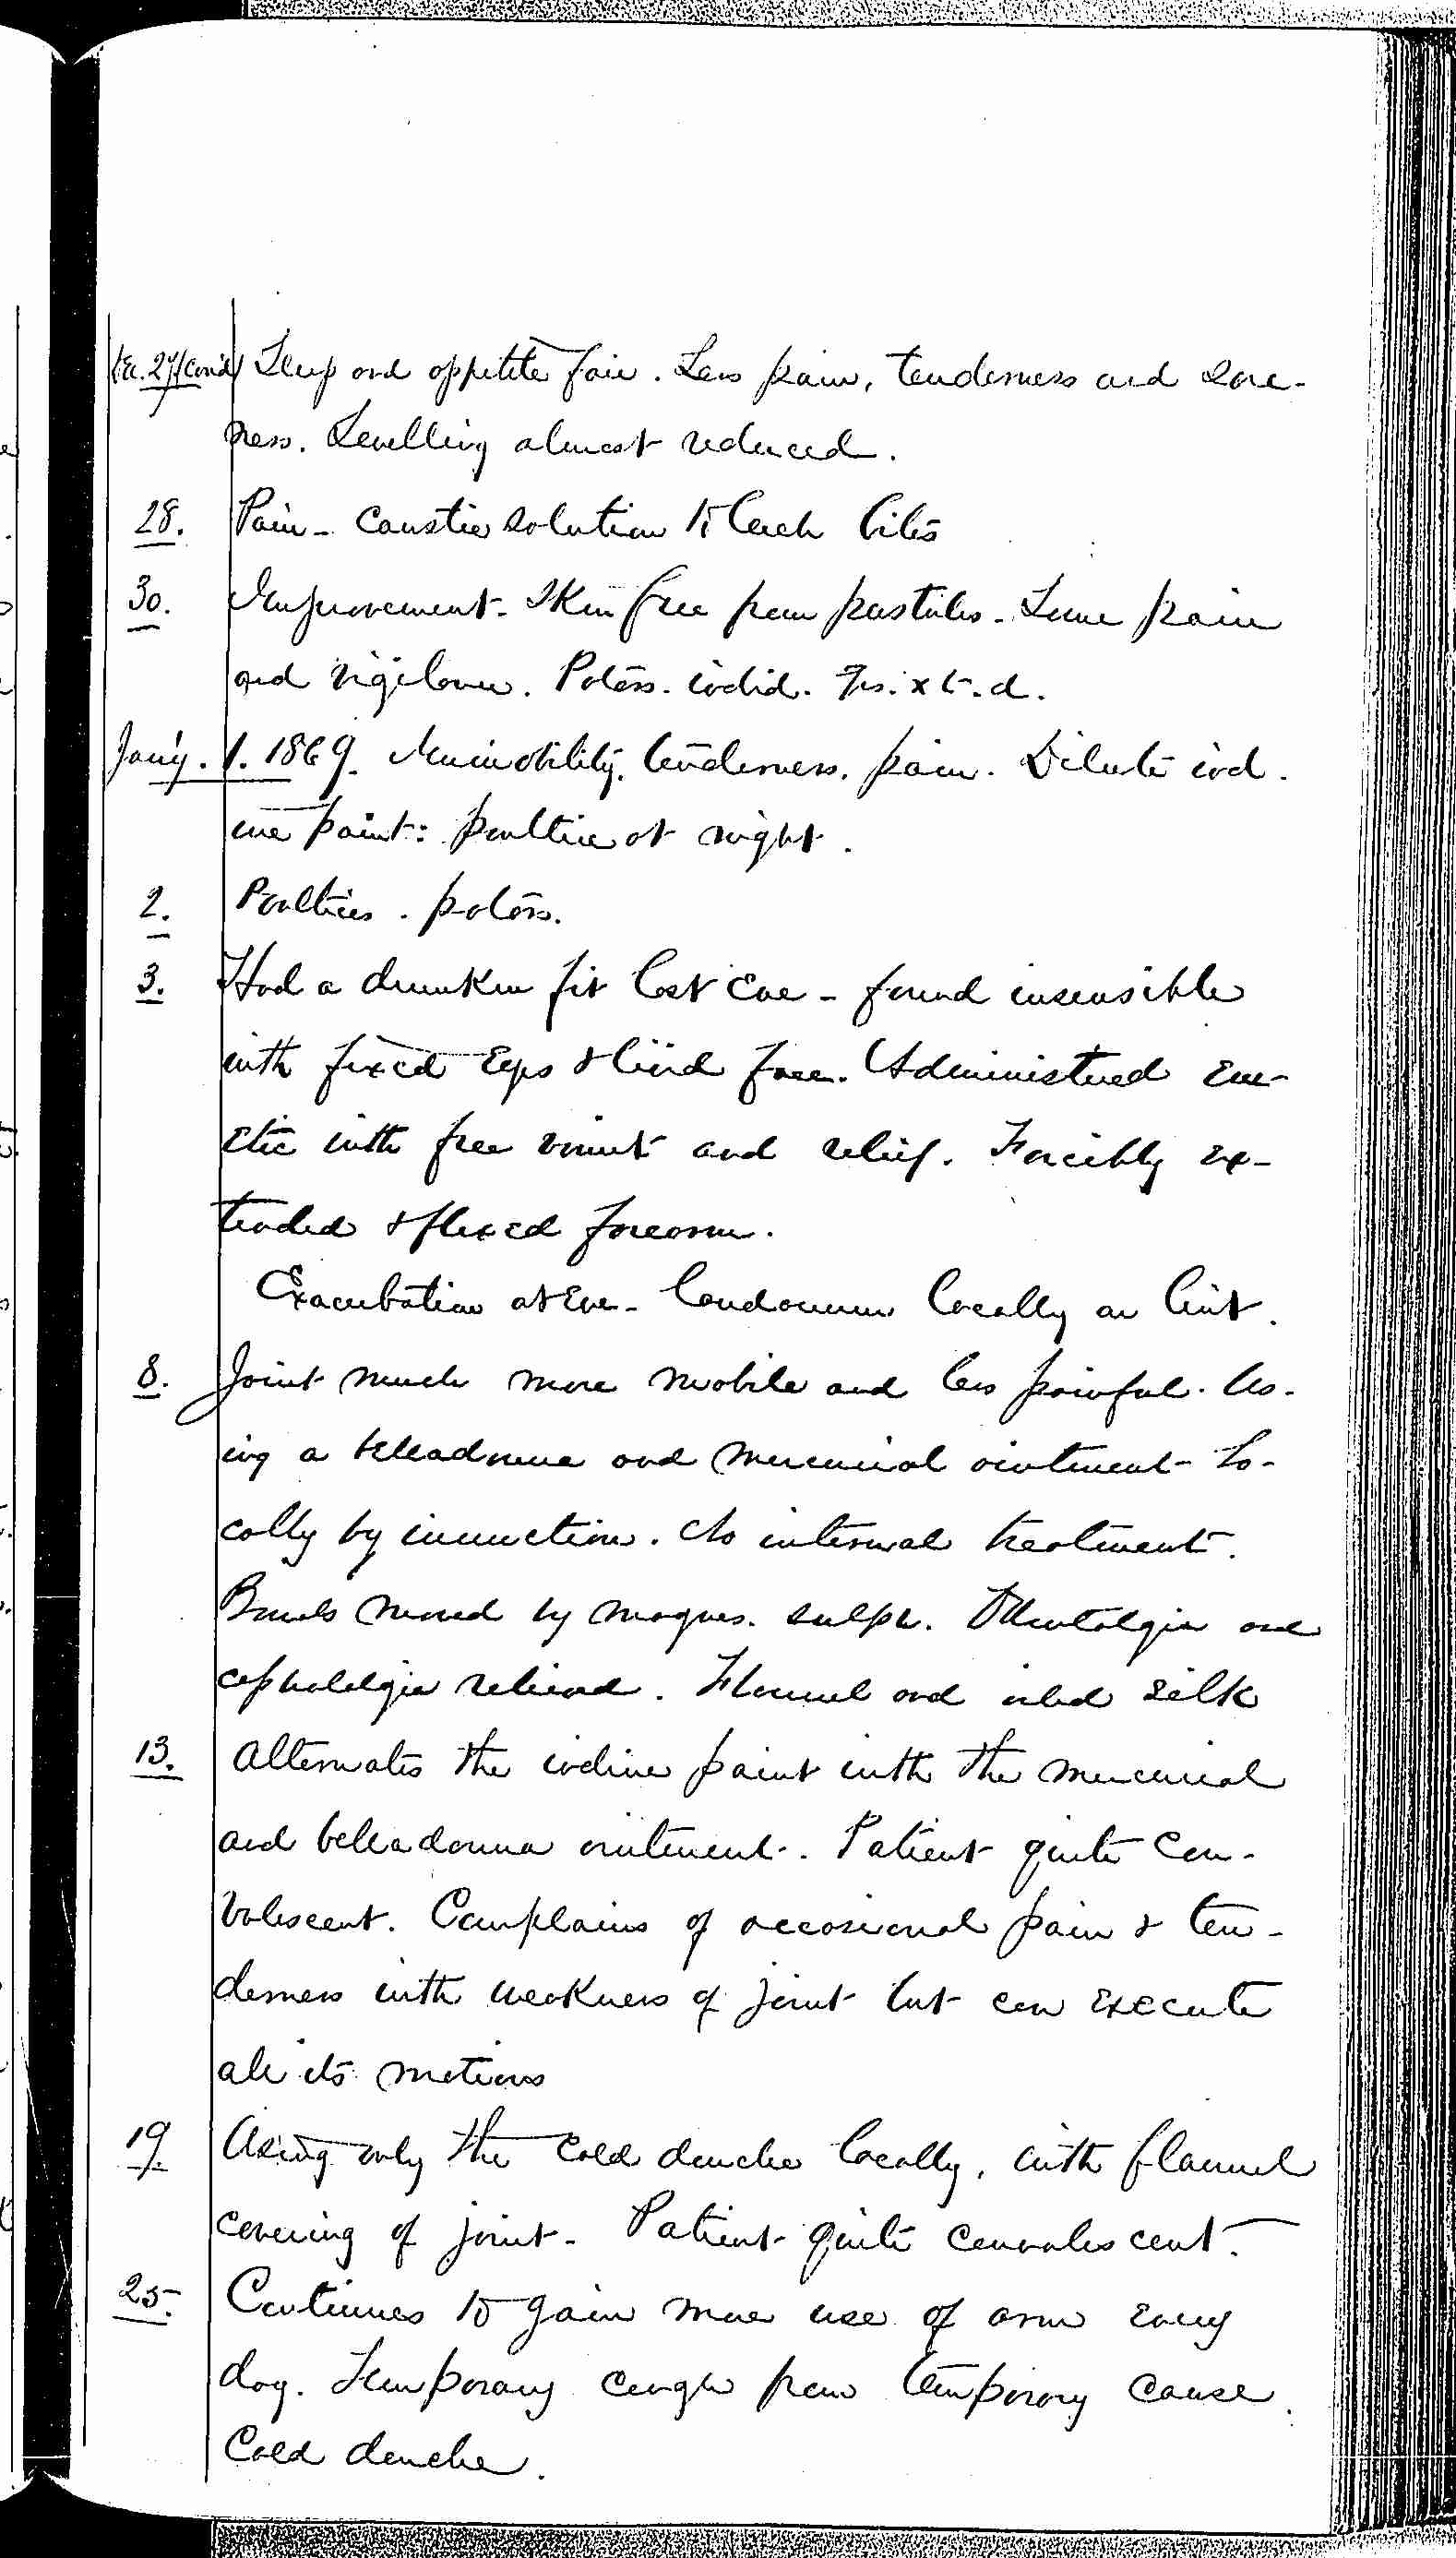 Entry for William B. Deal (page 3 of 4) in the log Hospital Tickets and Case Papers - Naval Hospital - Washington, D.C. - 1868-69